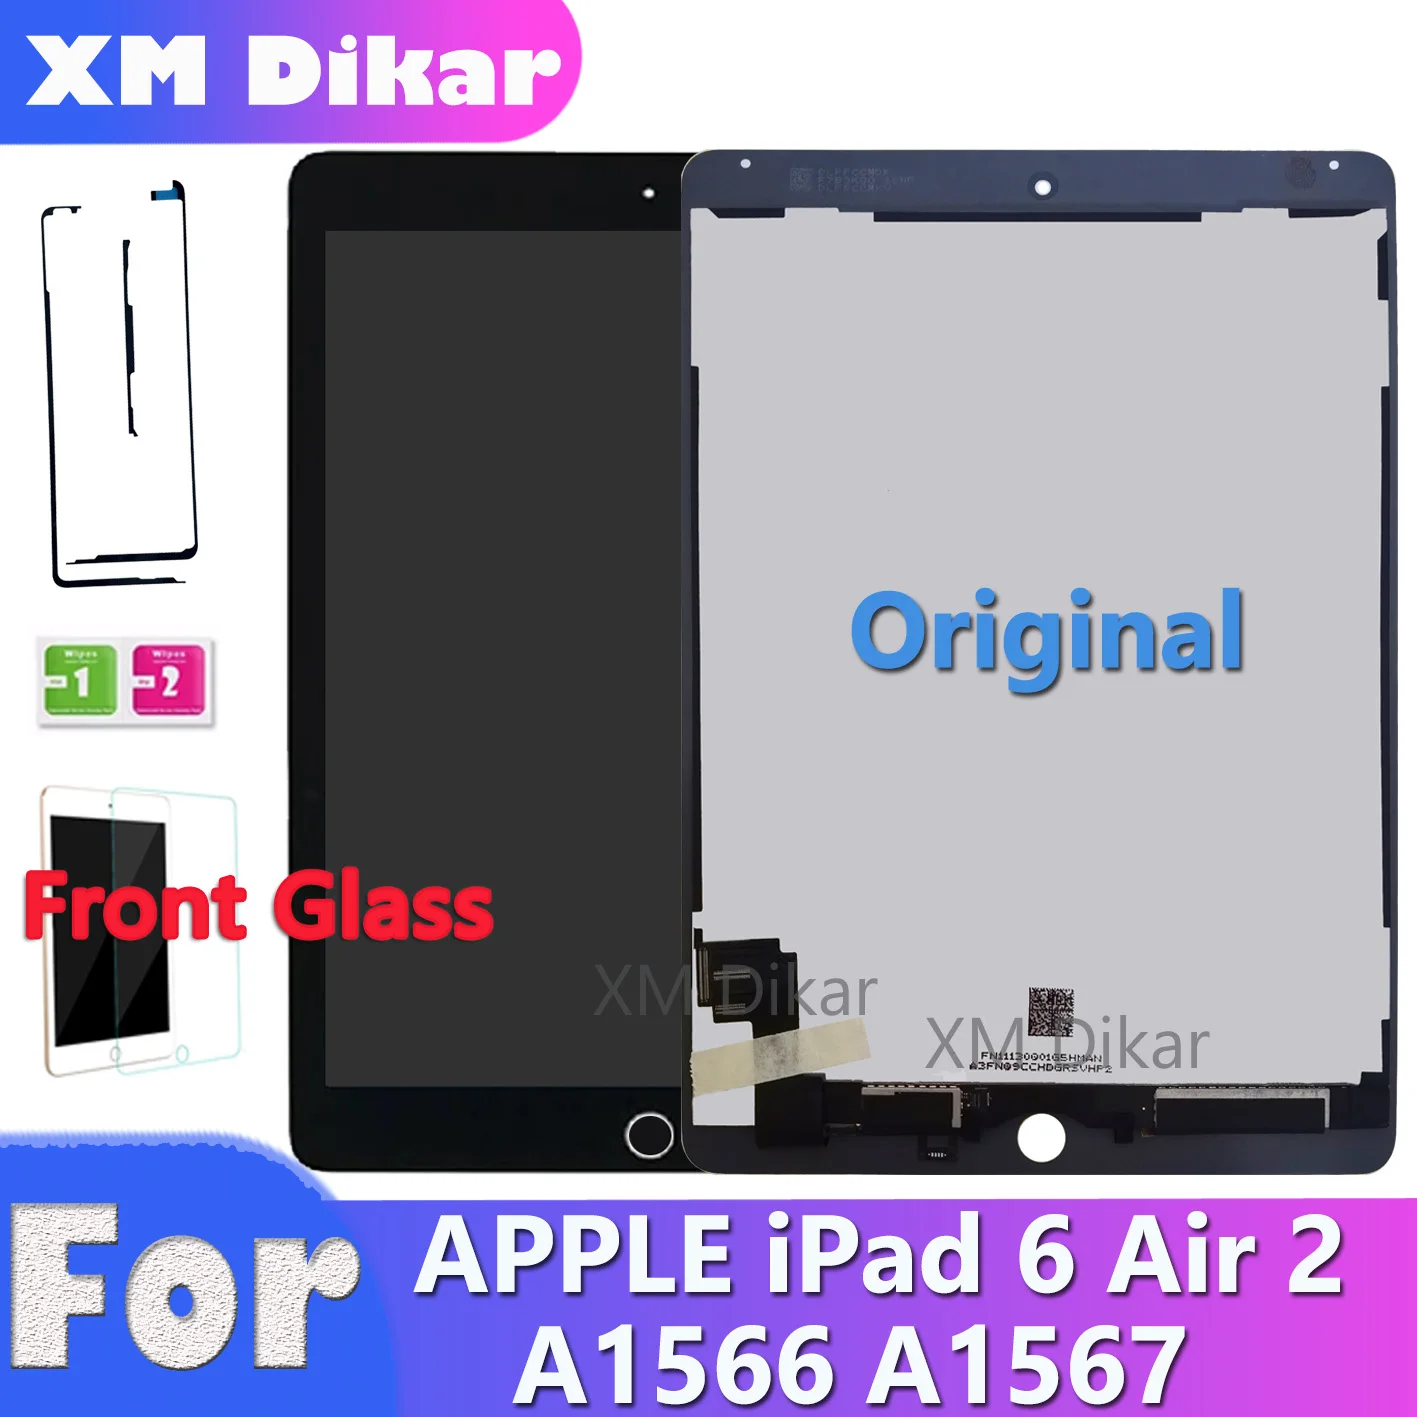 100% New Tablet LCD For Apple iPad 6 Air 2 A1567 A1566 Display Touch Screen  Digitizer Sensors Assembly Panel Replacement Parts - Price history & Review, AliExpress Seller - lianganbing Lcd Parts' Store